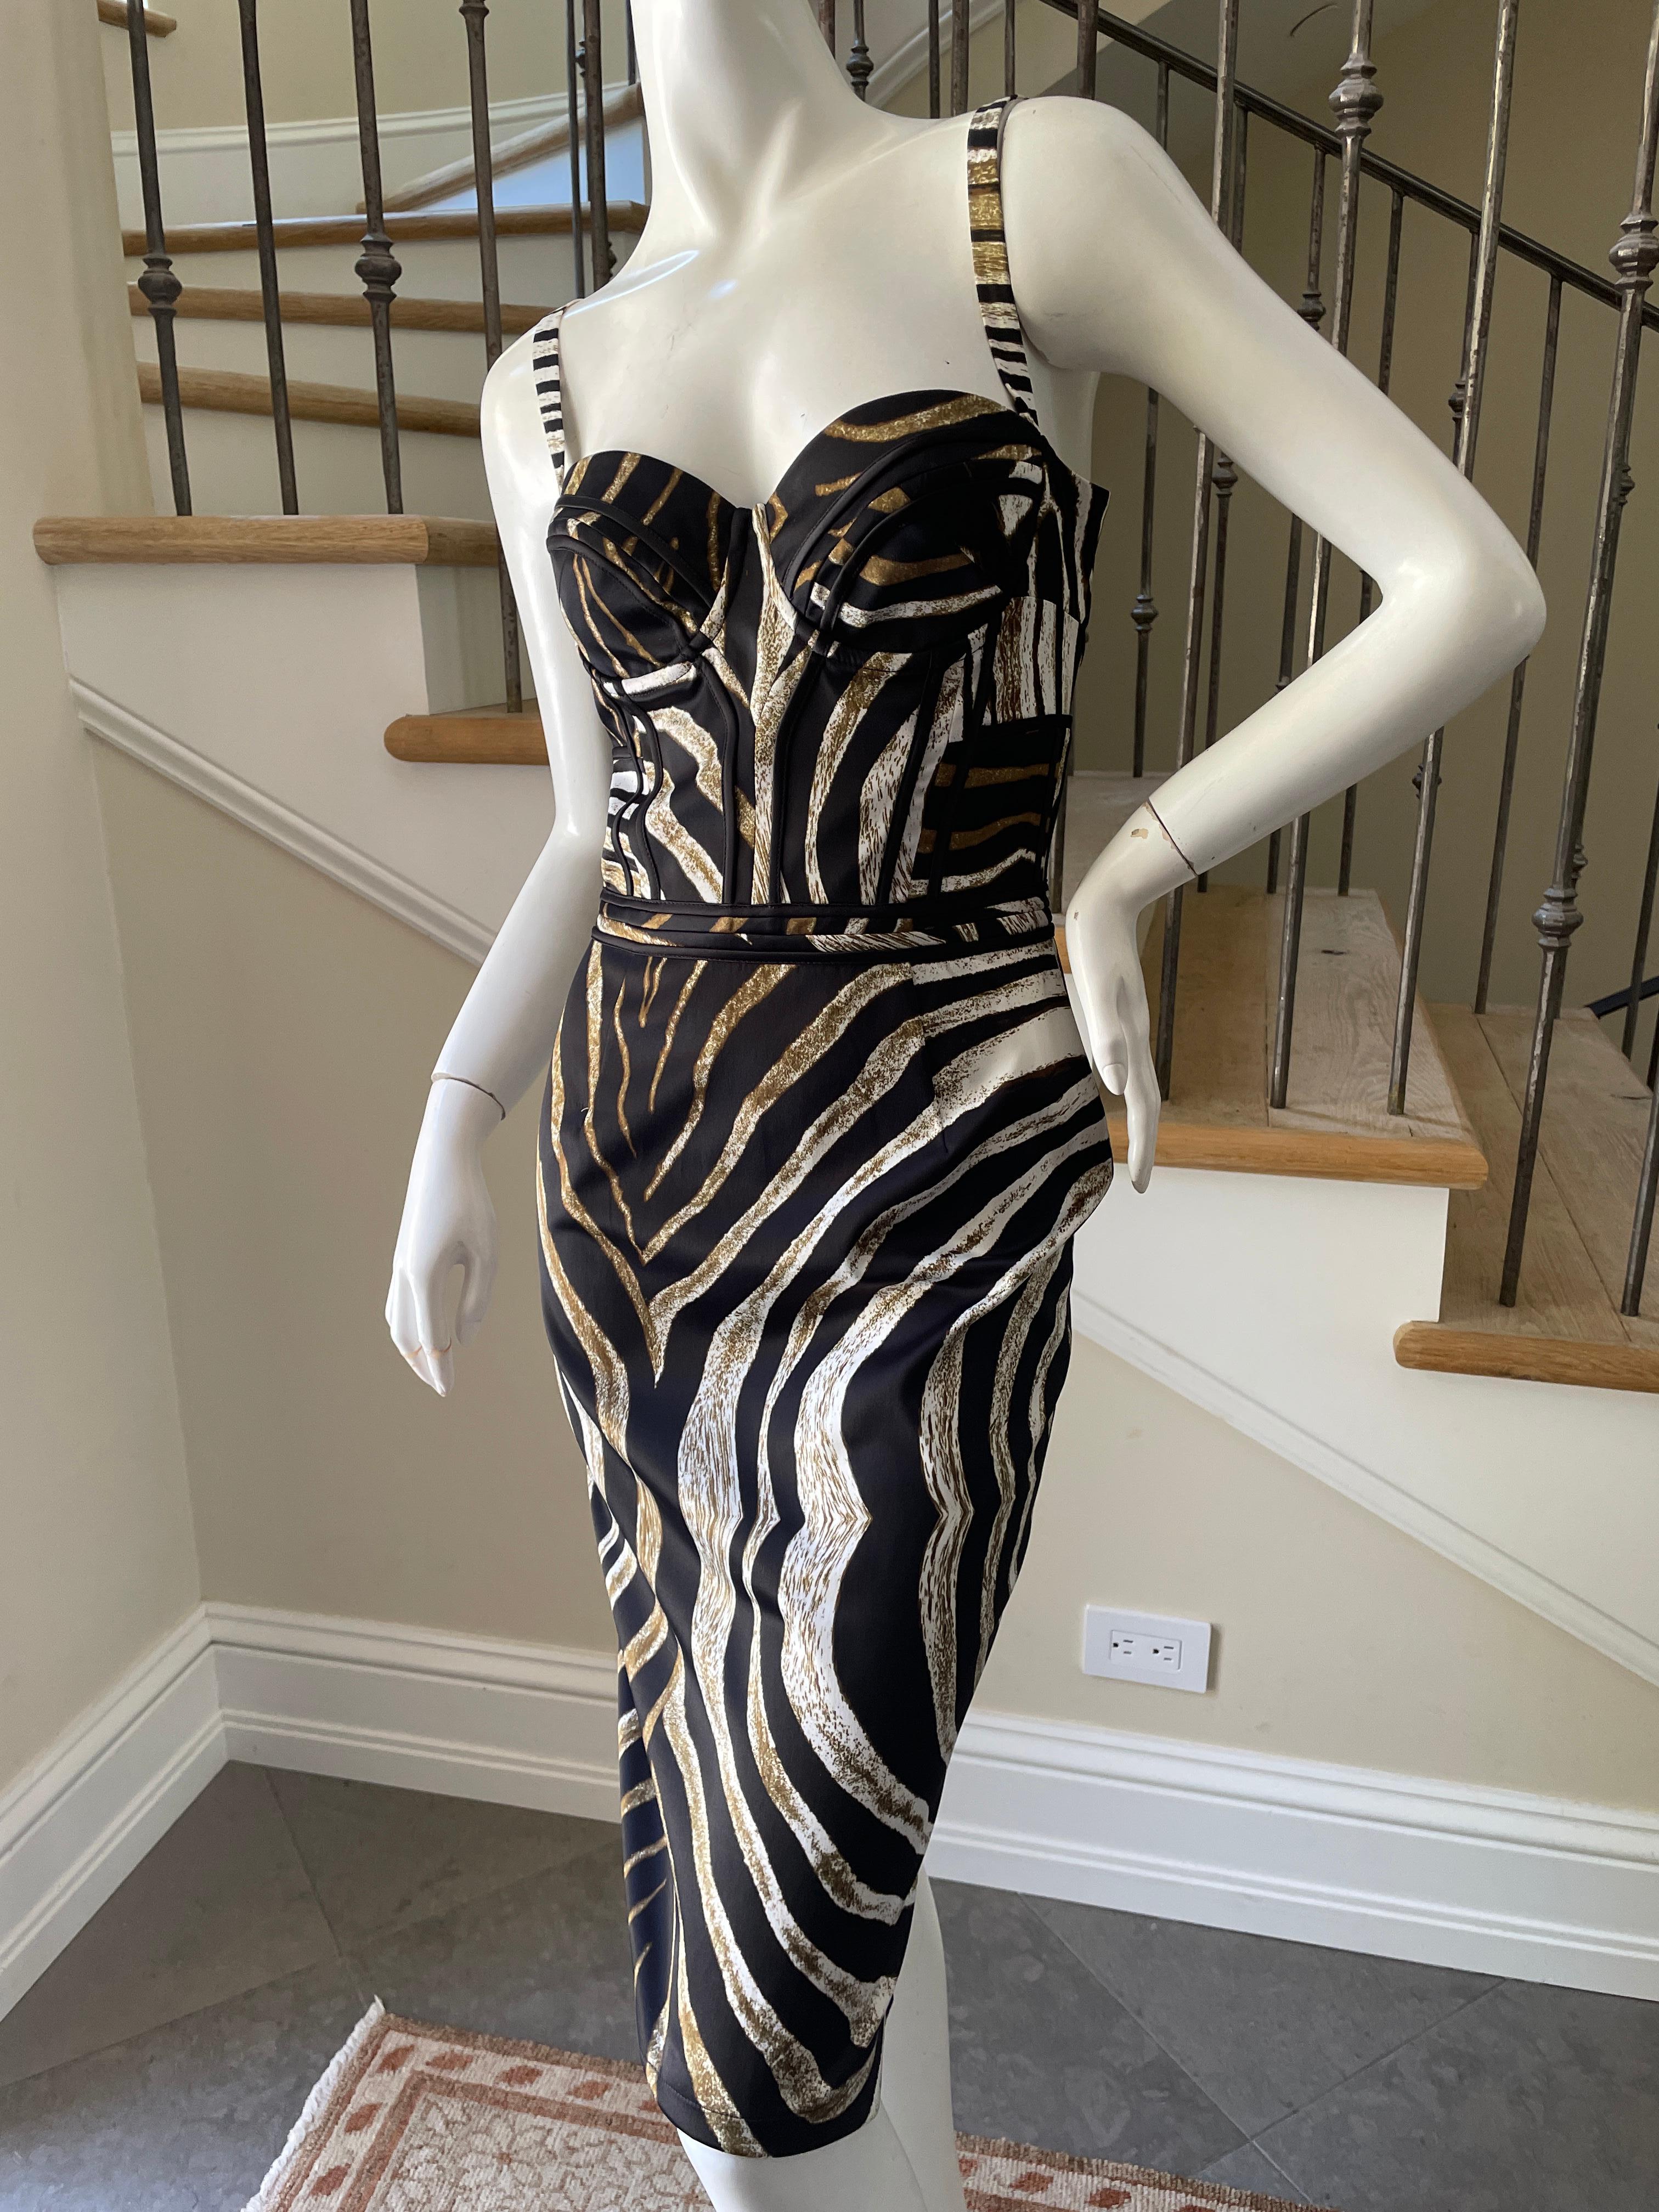 Just Cavalli Zebra Print Corset Cocktail Dress by Roberto Cavalli. 
 This is so pretty, use the zoom feature to see details.
Size 42
Bust 34